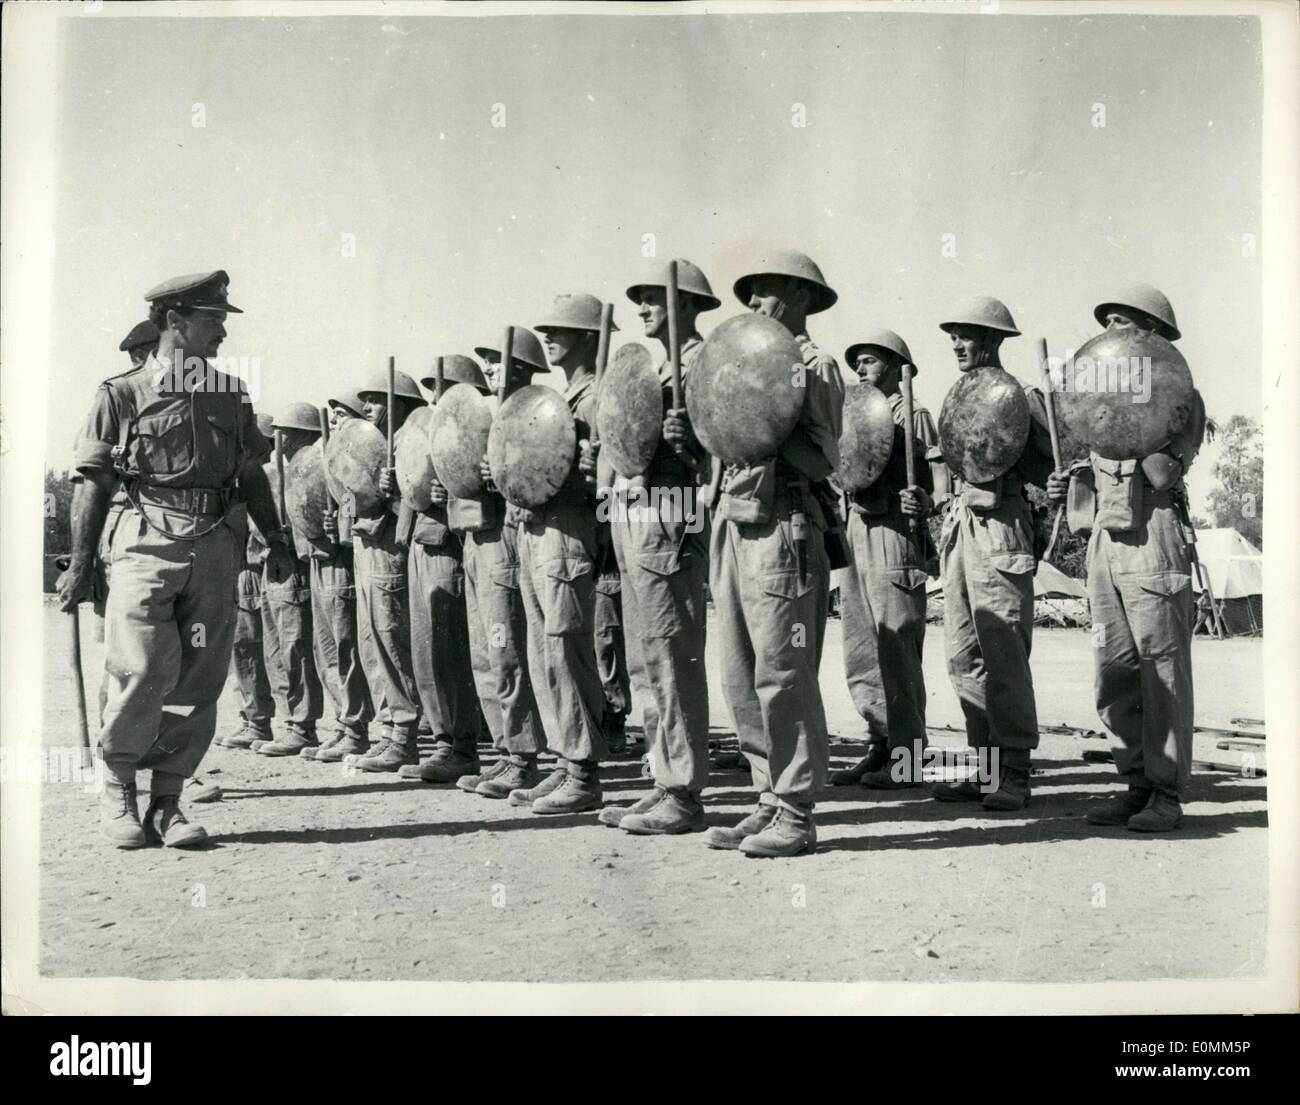 Oct. 10, 1955 - British troops in Cyprus Issd with Batons and Shields - replacing their rifles as anti-riot weapons.: Following the statement by the Governor of Cyprus-field Marshal Sir John Hardin - the british troops - 1st. battalion South Stafford regiment have been issued with metal shields (dustbin lids) and batons with which to quell riots. This is the first time in the history of the British Army that Tommy Atkins has to lay down his eifle and bayonet for a stick and a dustbin lid. Photo shows men of the South Stafford regt Stock Photo